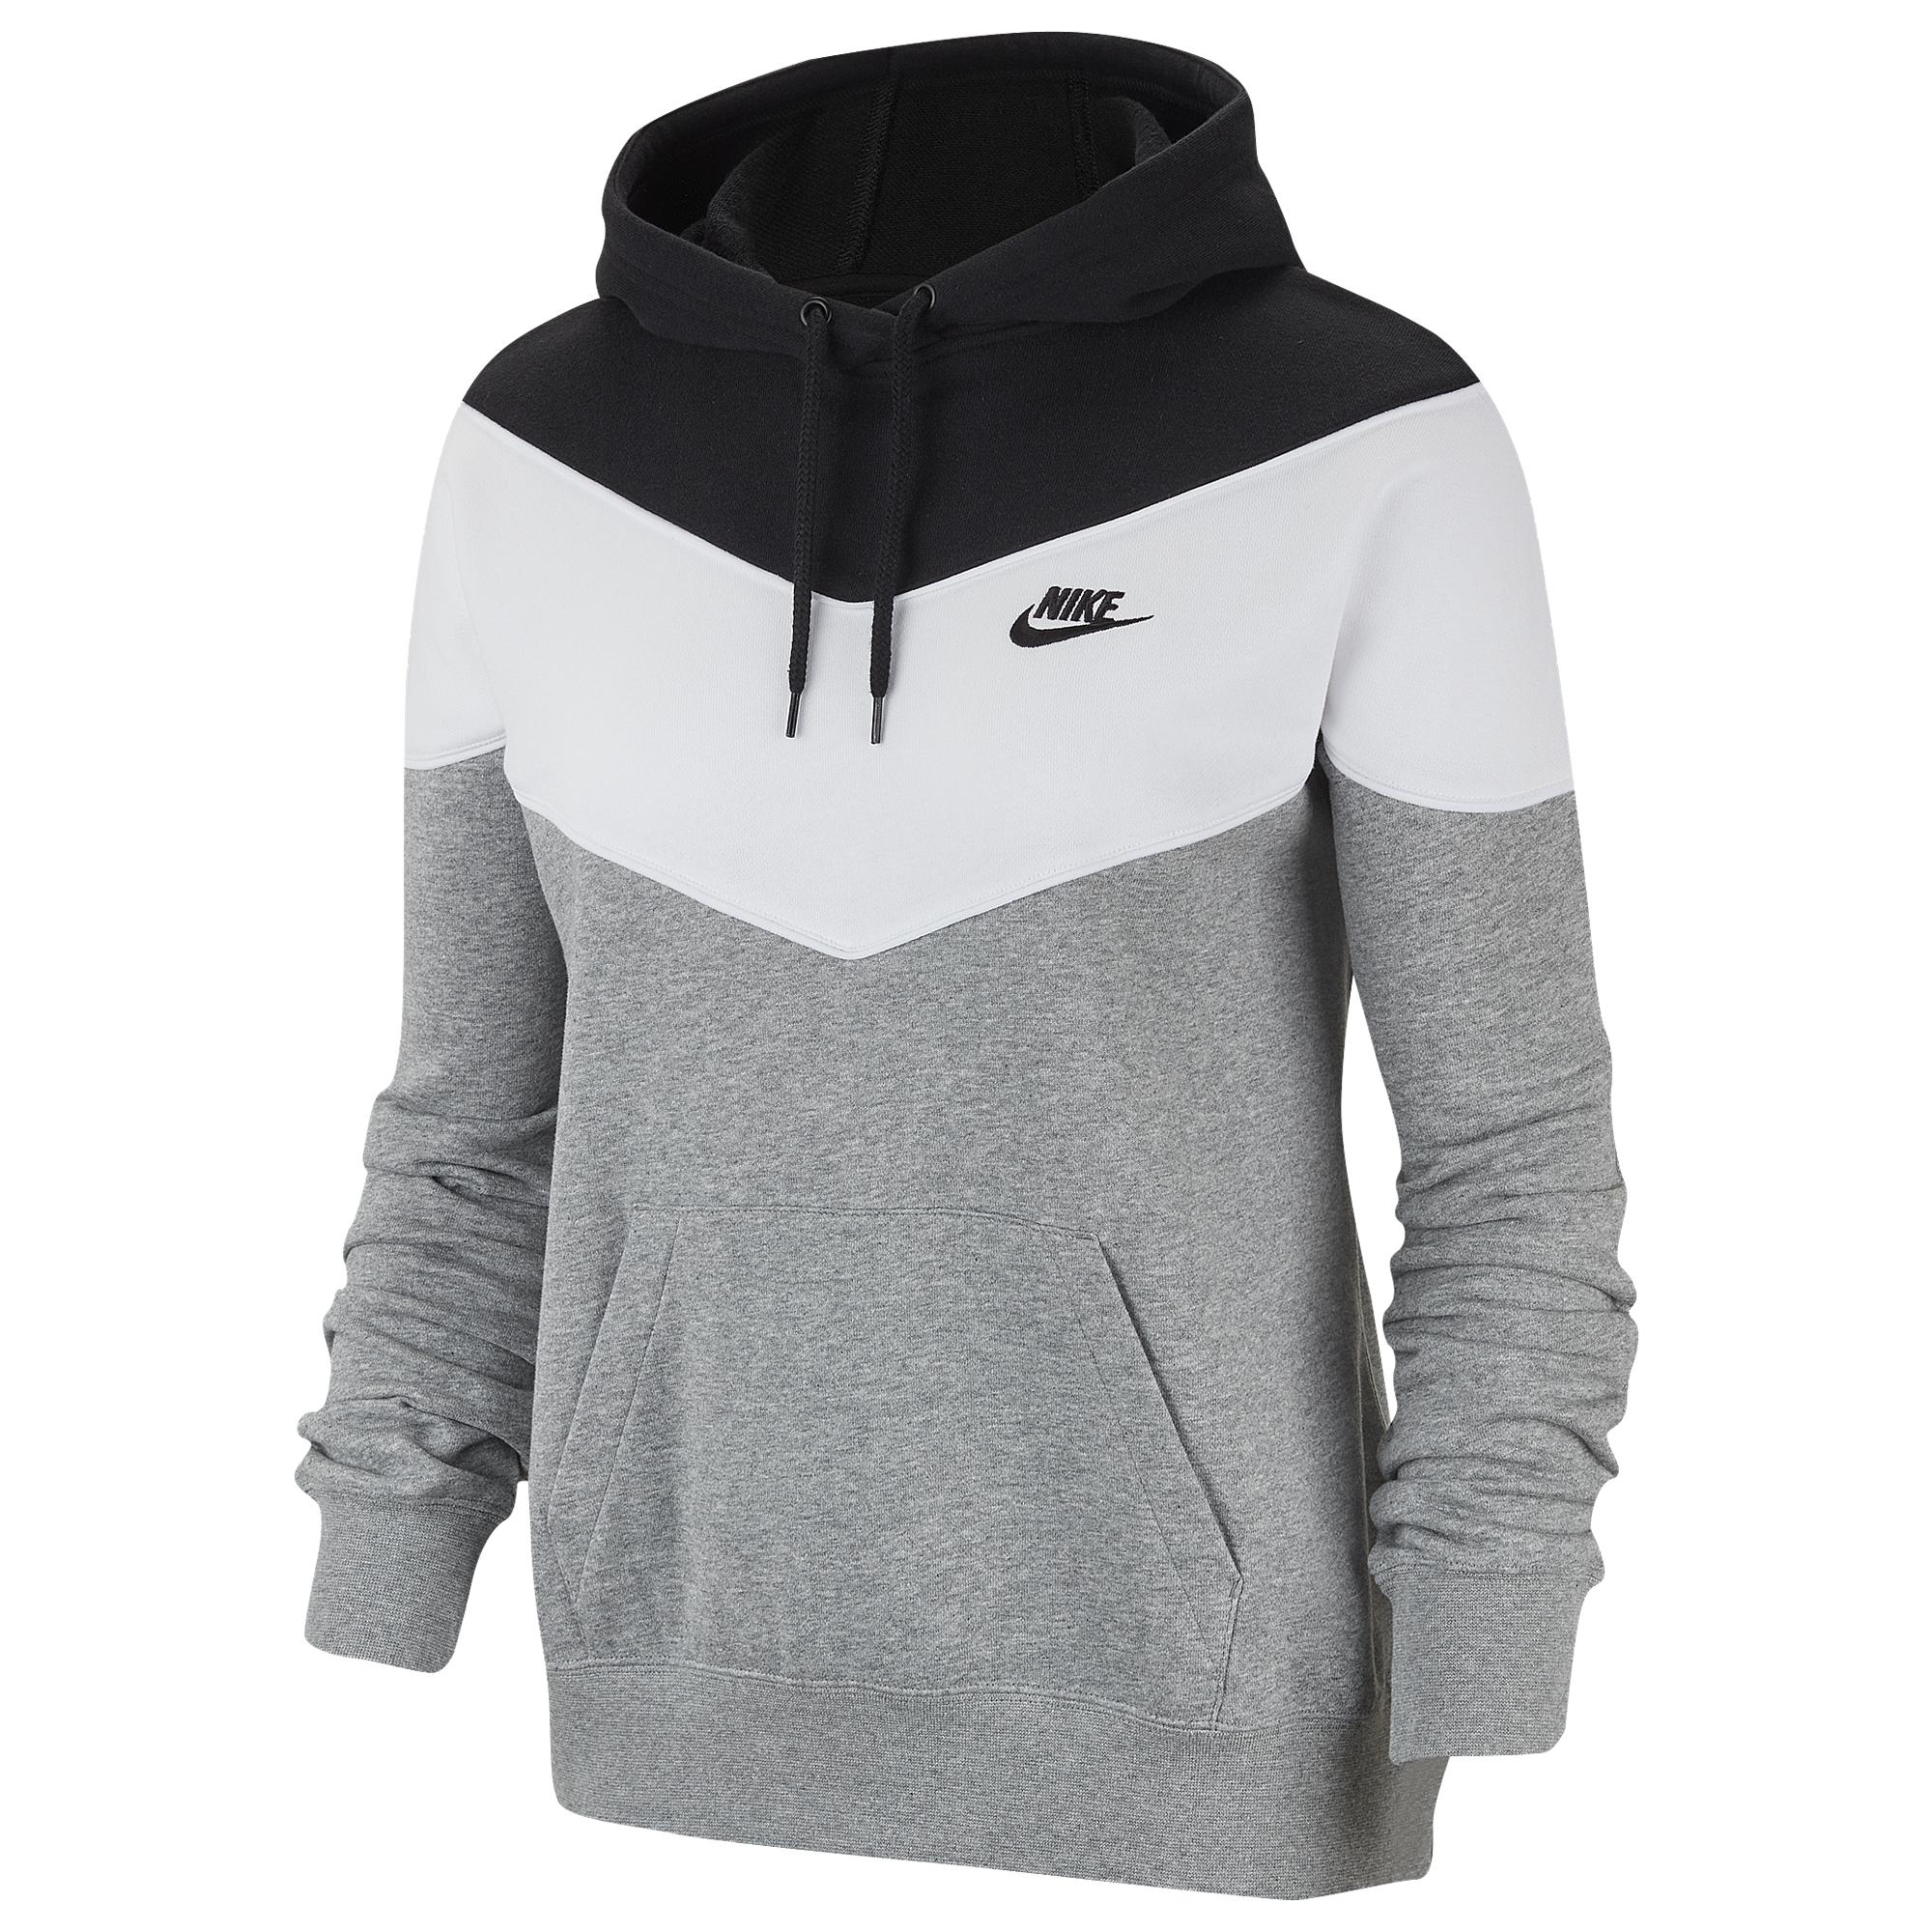 grey and white nike sweater